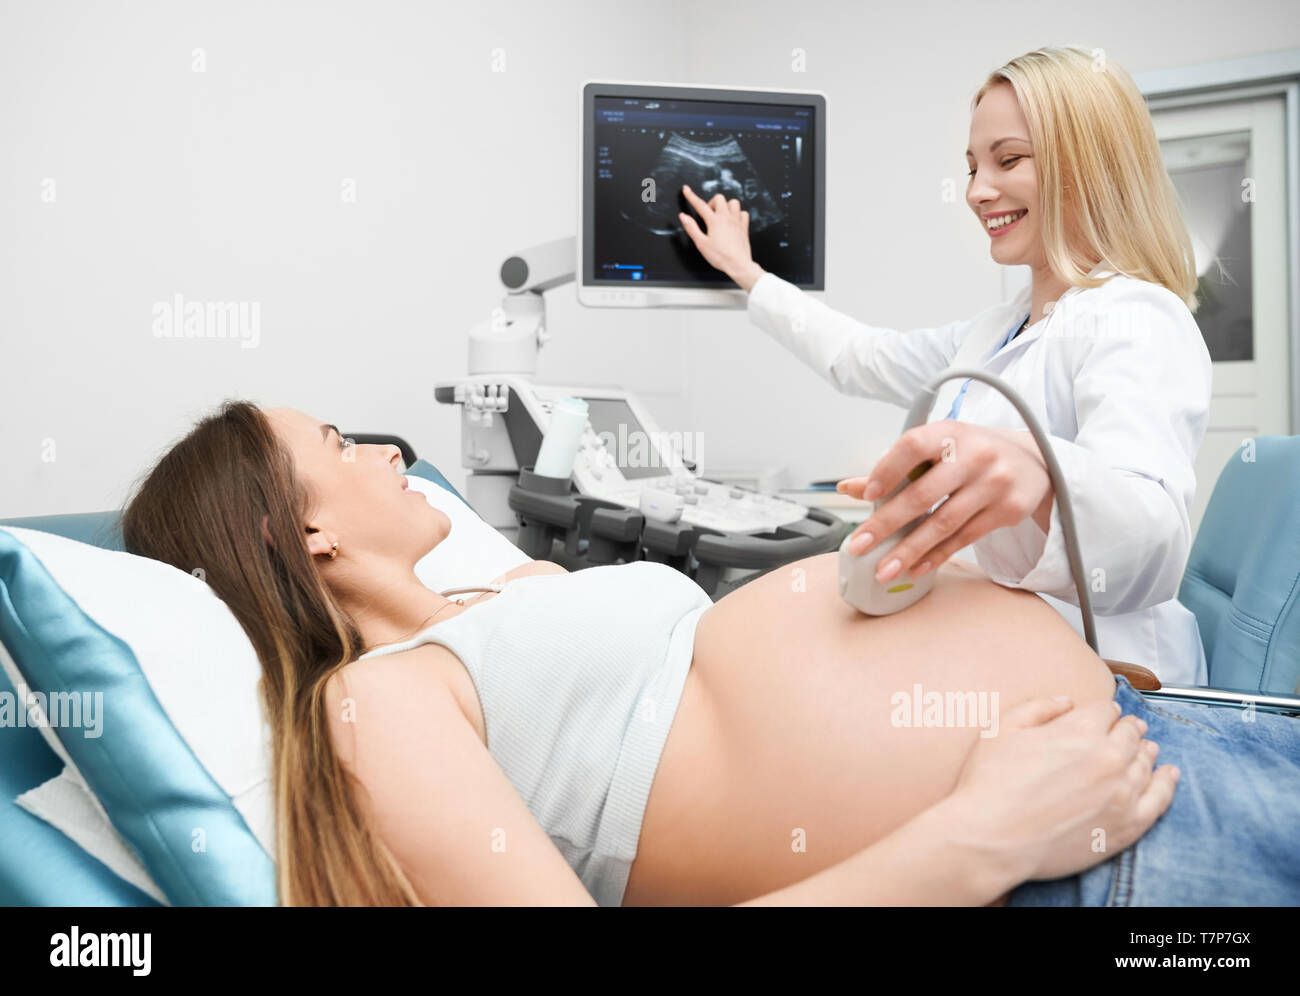 Professional female doctor pointing at screen and showing little baby to future mother. Pregnant woman lying on couch during ultrasound procedure in medical center. Concept of diagnostic and health. Stock Photo